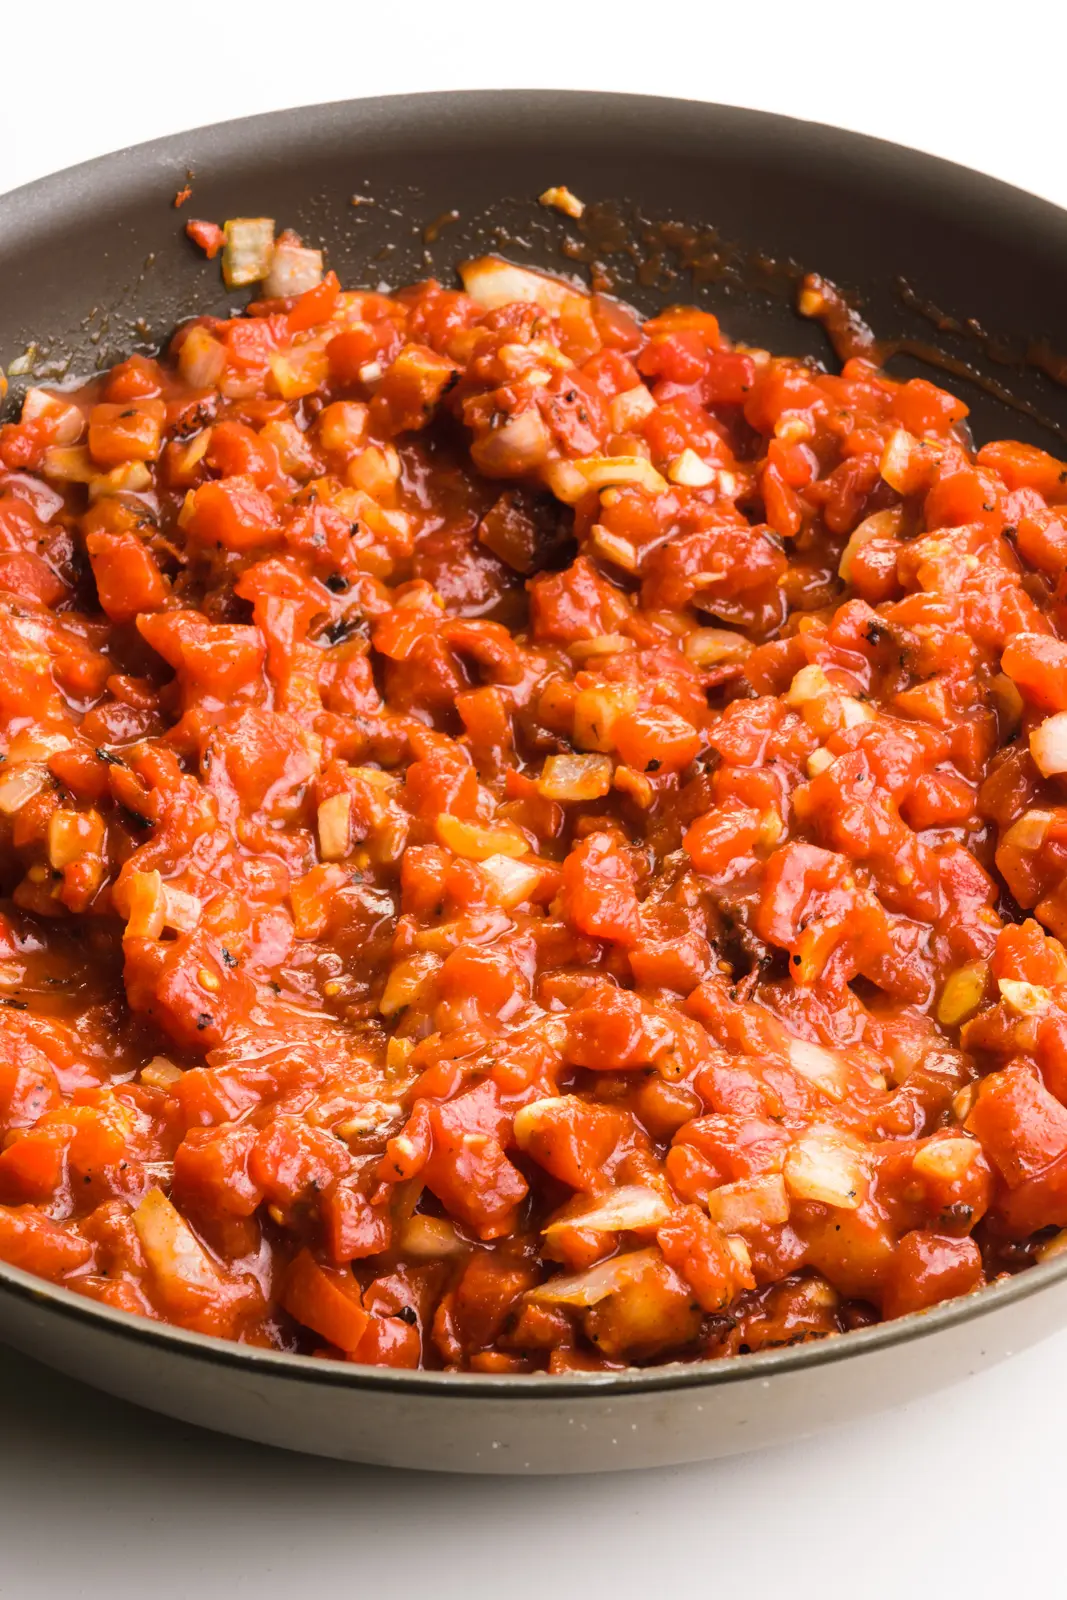 A tomato-based mixture is in a skillet.